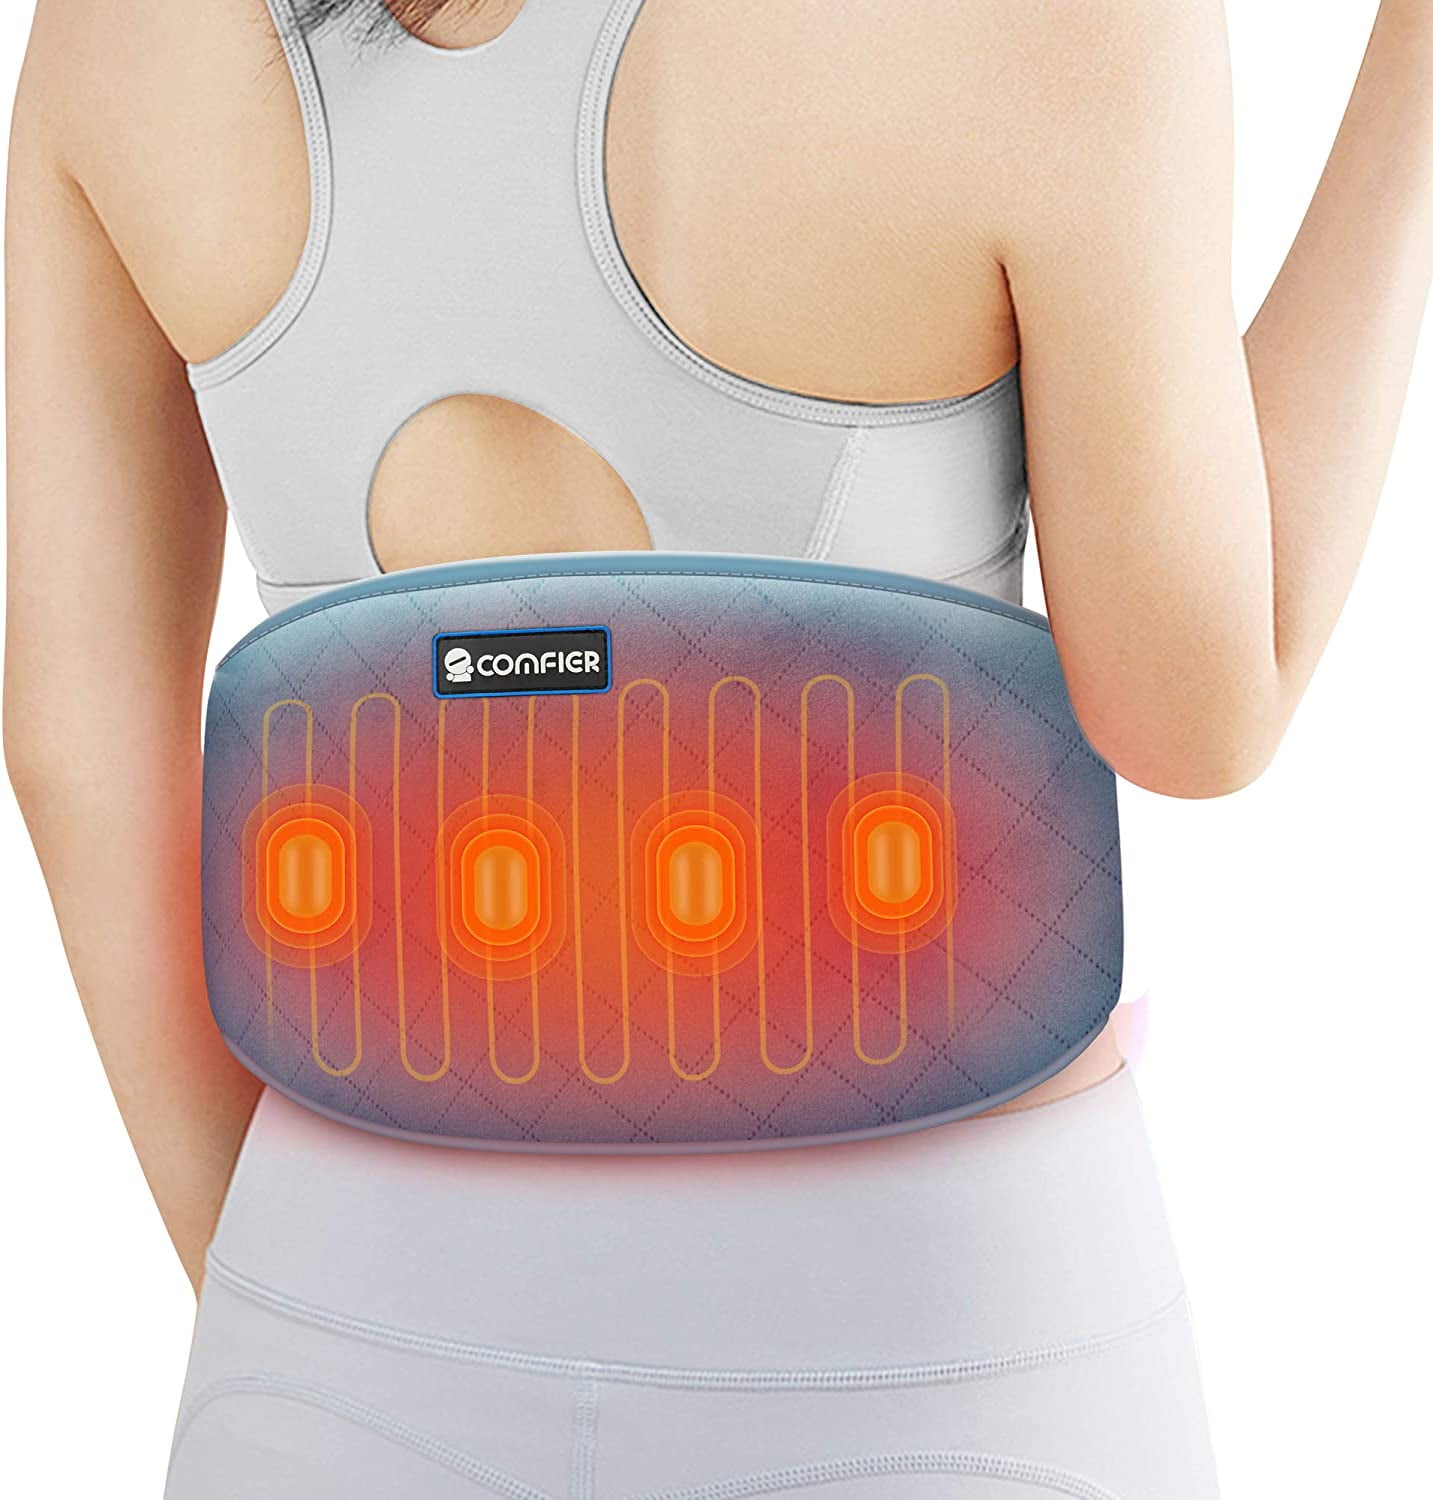  Heating Pad For Back Pain Relief Heated Back Brace For Men  Women Lower Back Massager Lumbar Waist Abdominal Stomach Spine